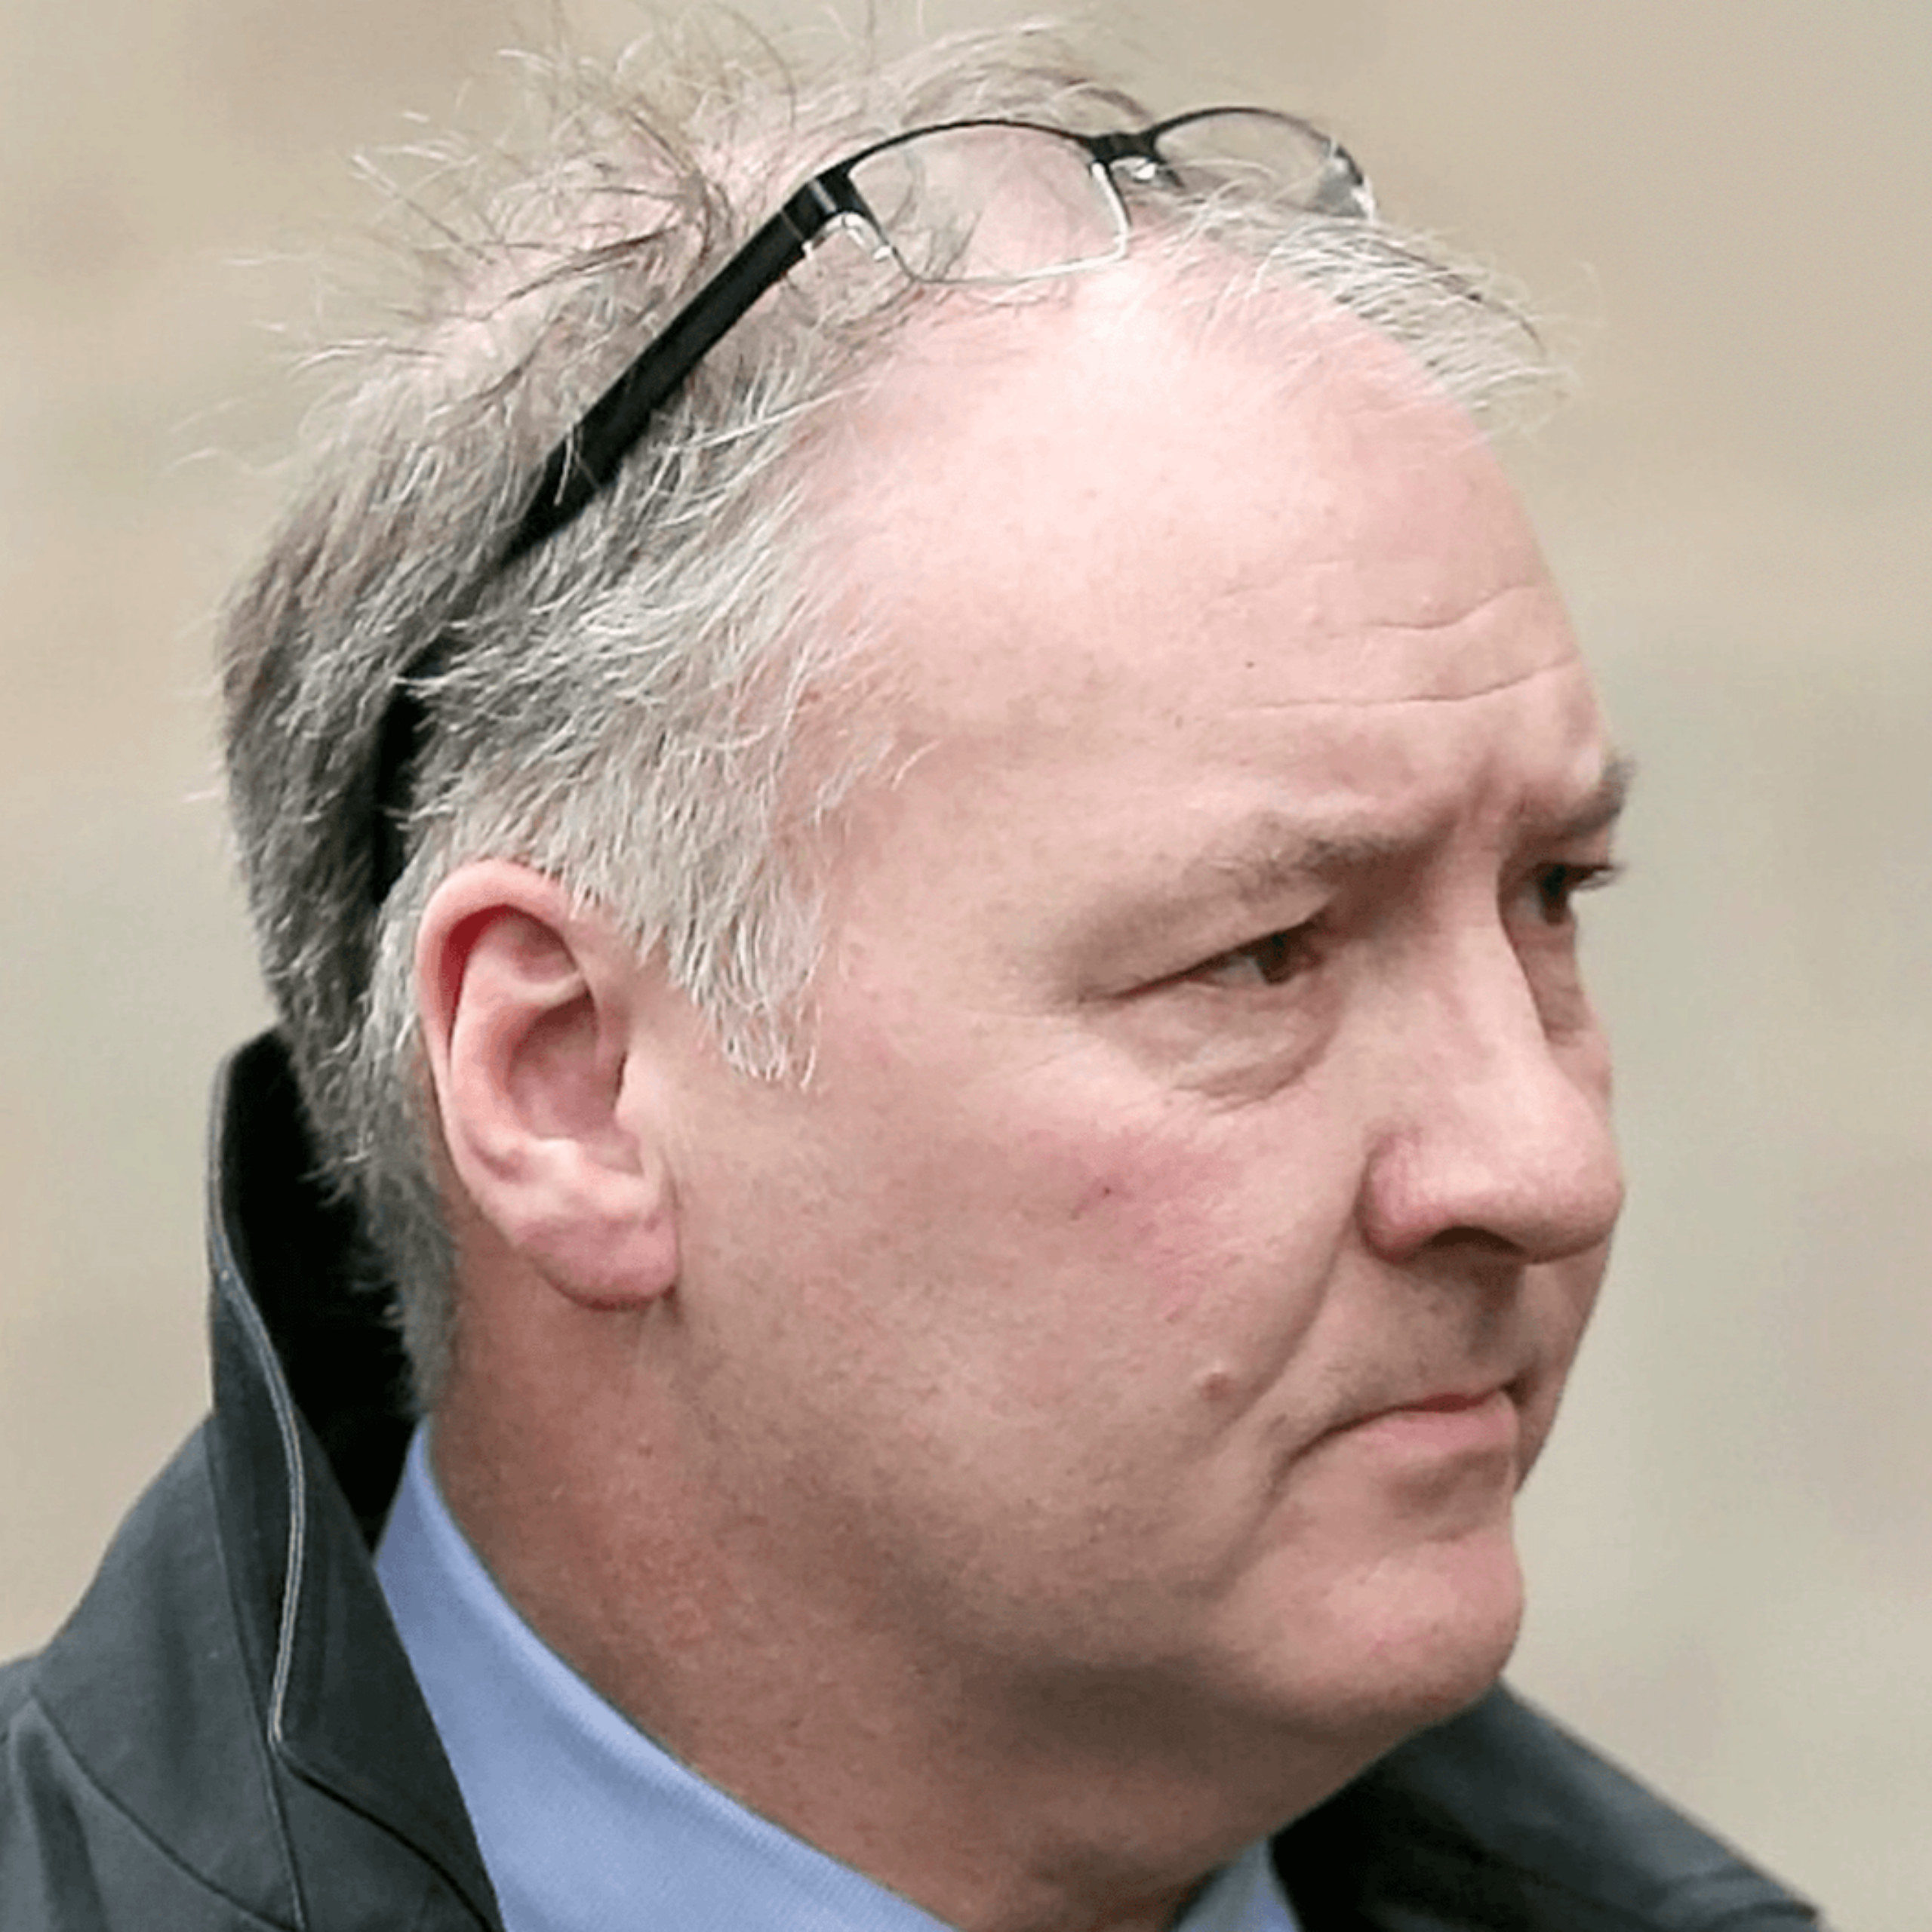 A photo of jailed surgeon Ian Paterson who operated at Spire hospitals